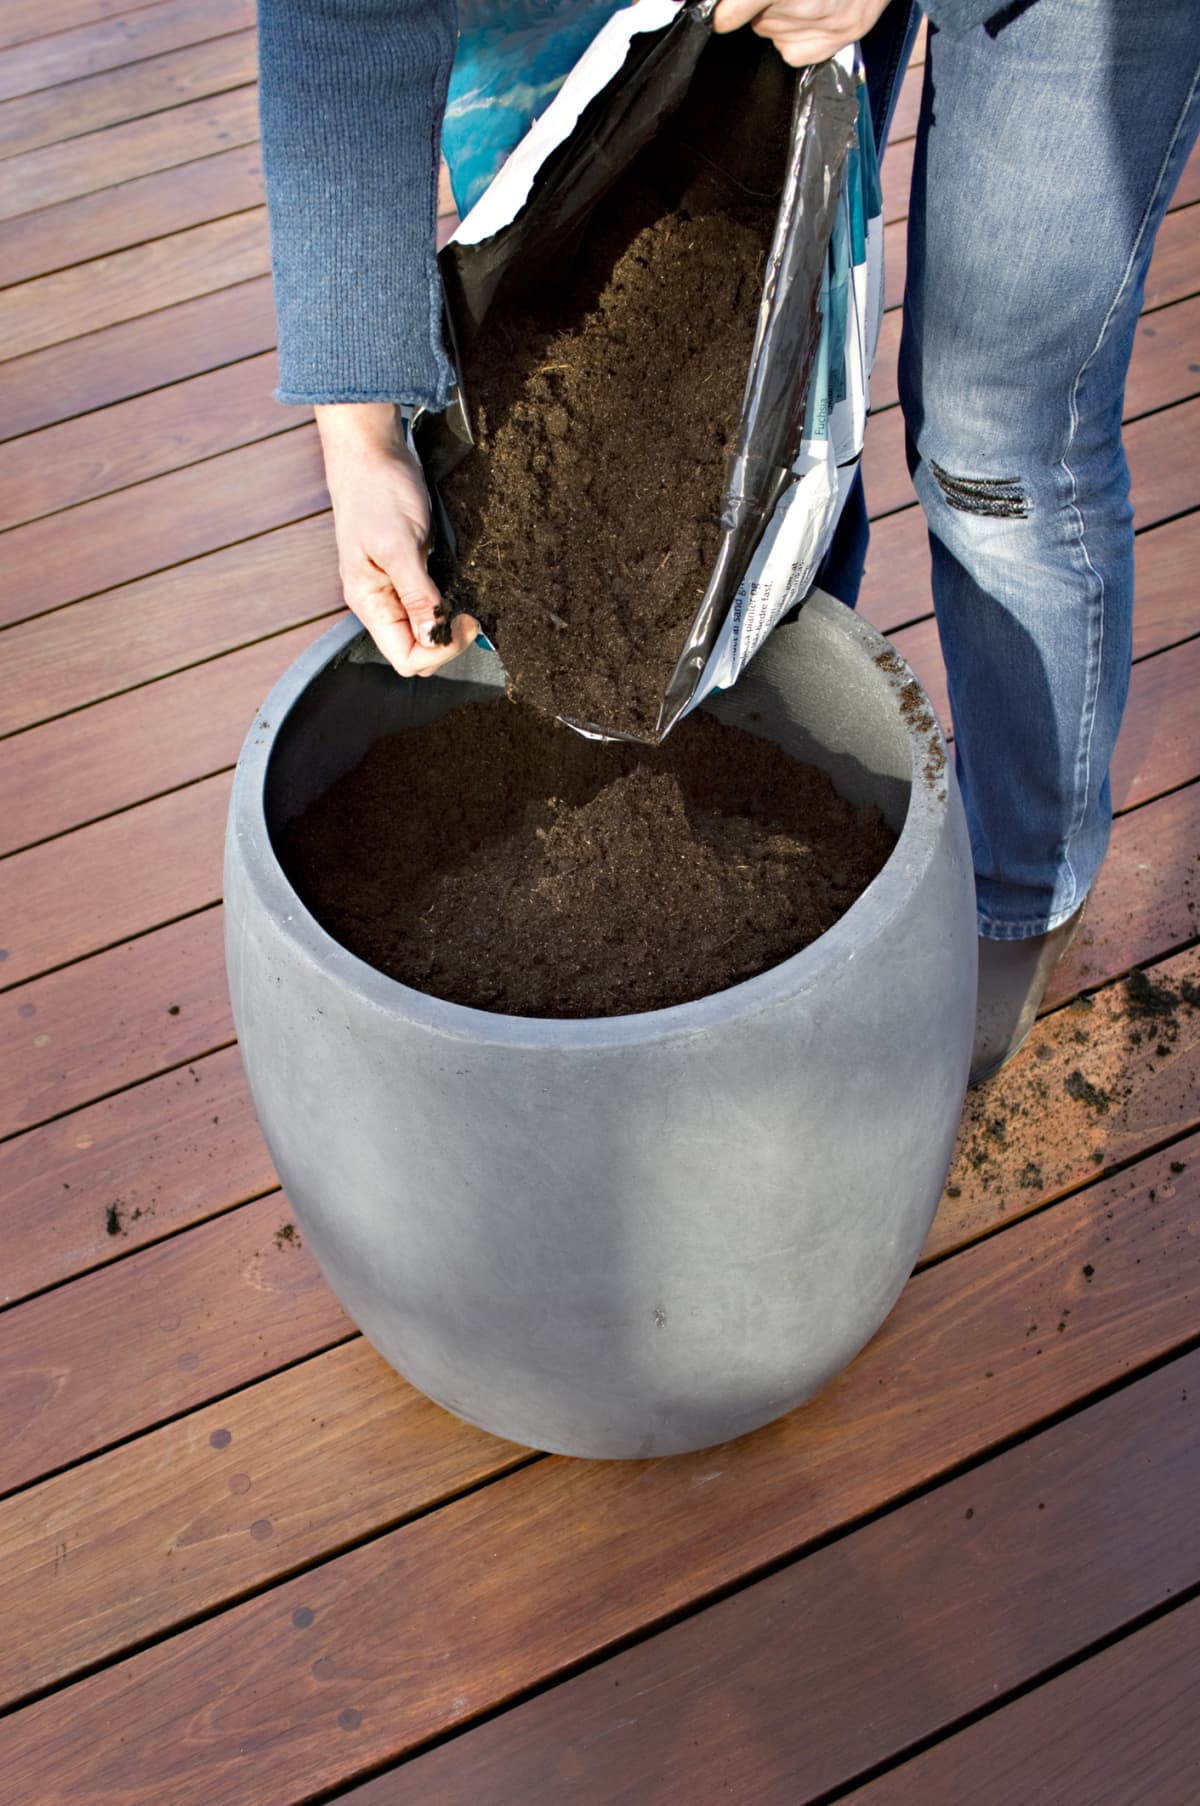 A person pouring potting soil into a container